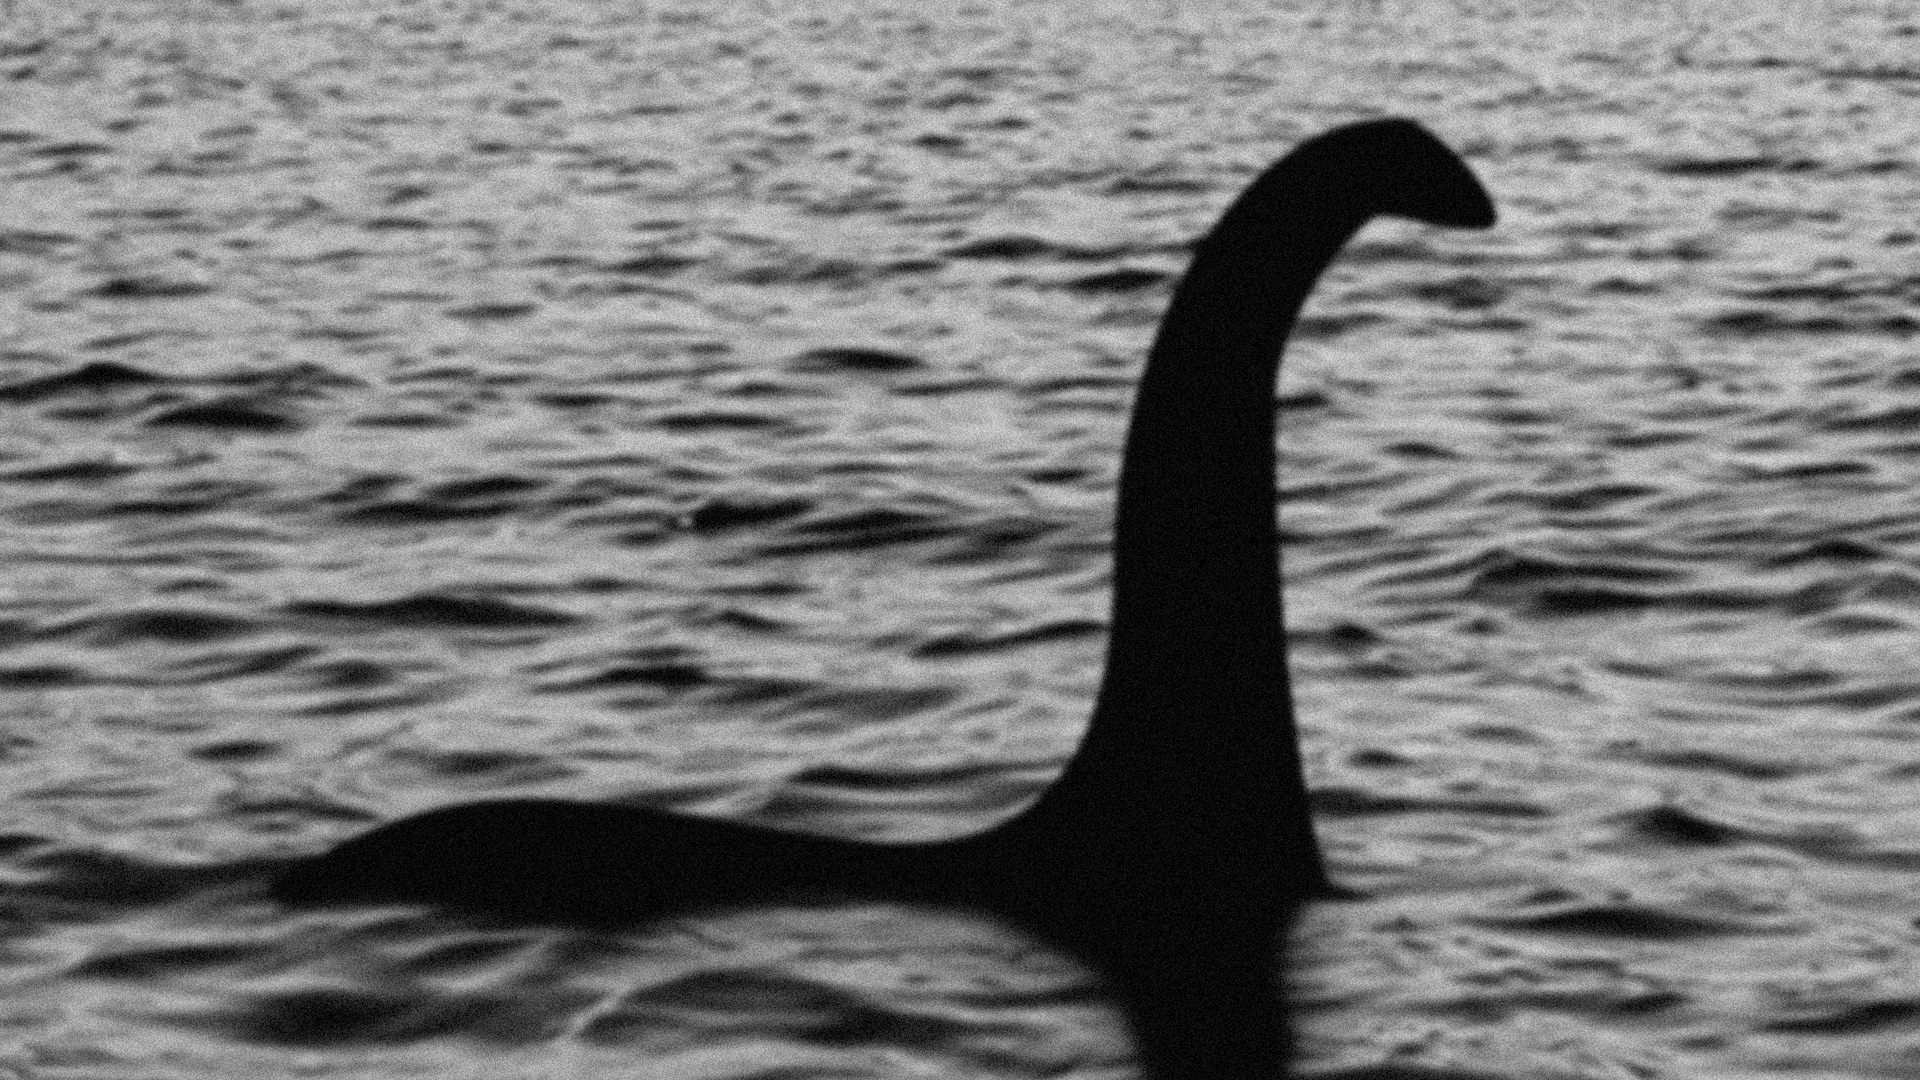  'Loch ness monster' microbe stretches its neck to 30 times its body length in seconds 